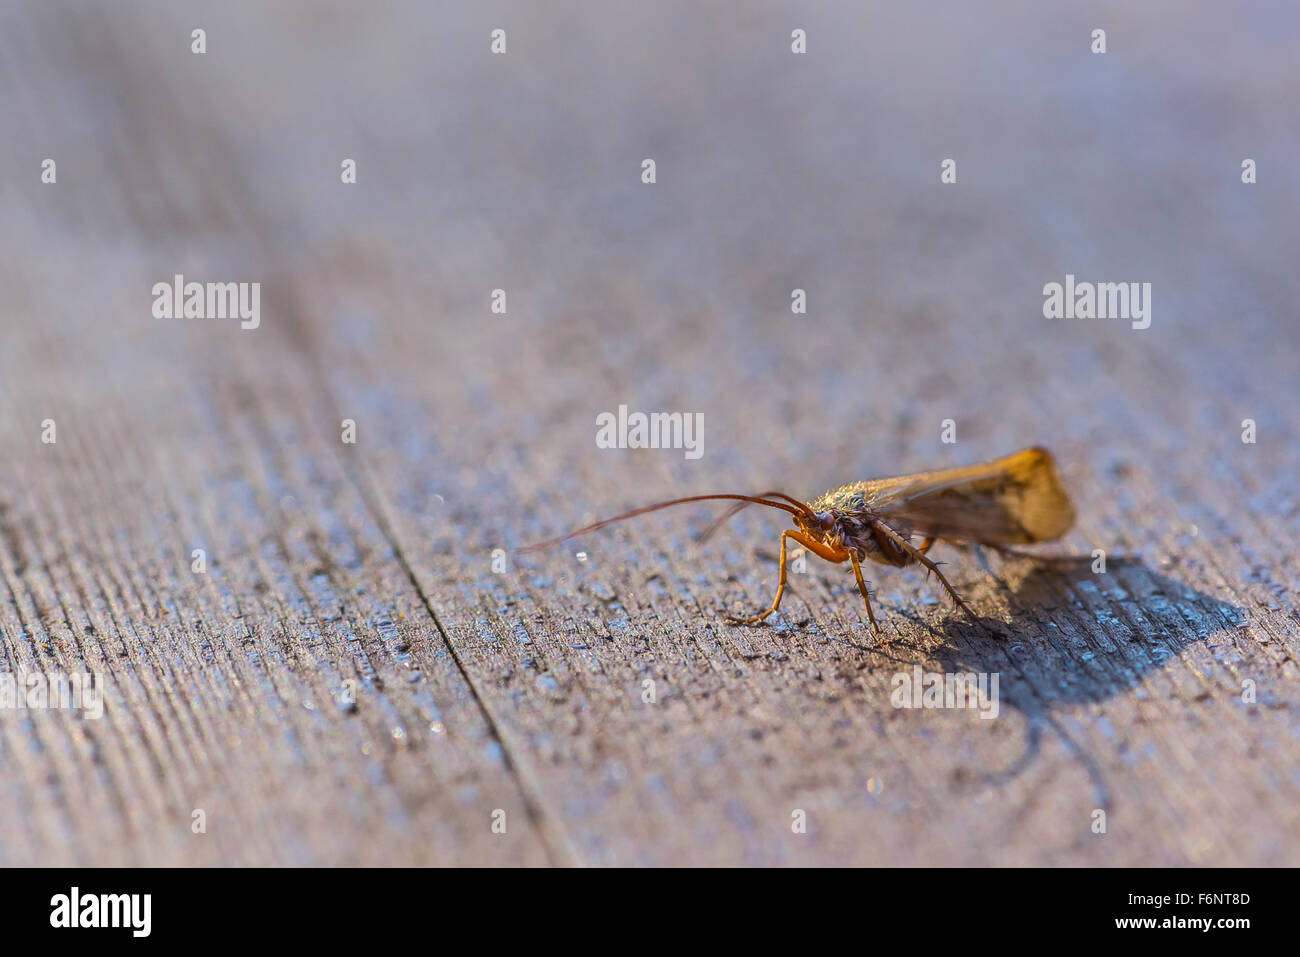 Single winged insect on wooden table Stock Photo